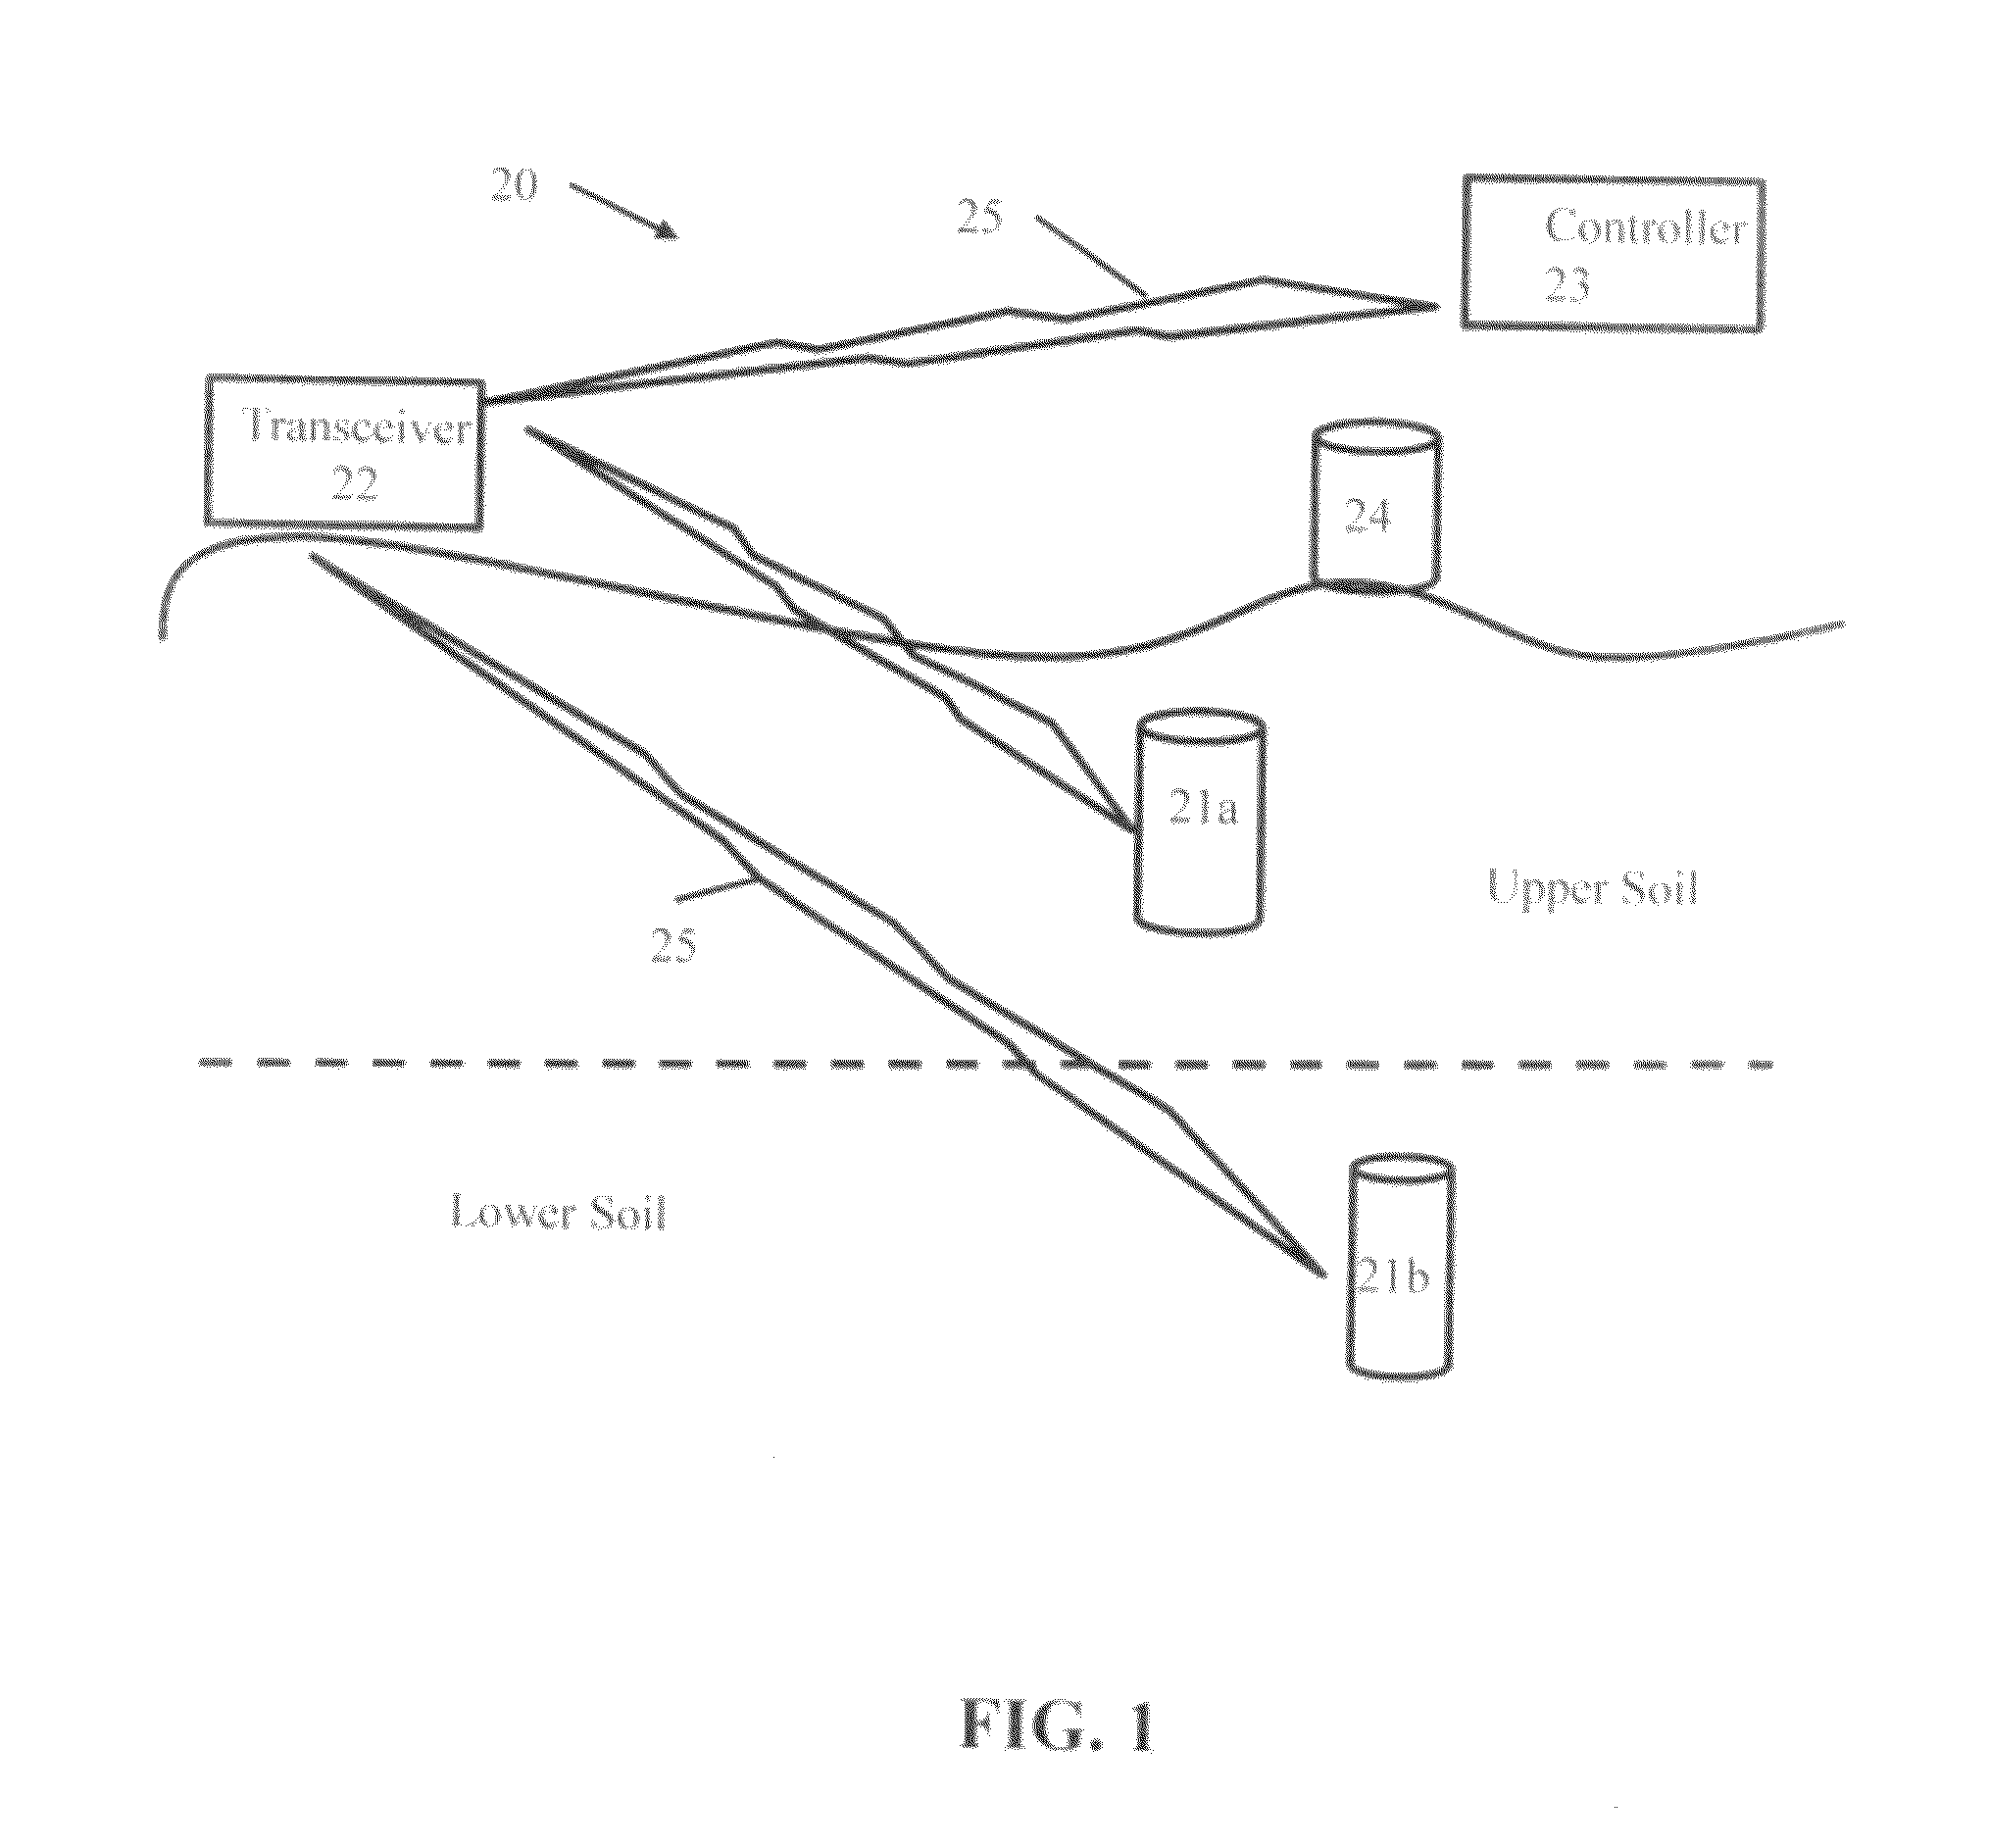 Method and system for monitoring soil and water resources